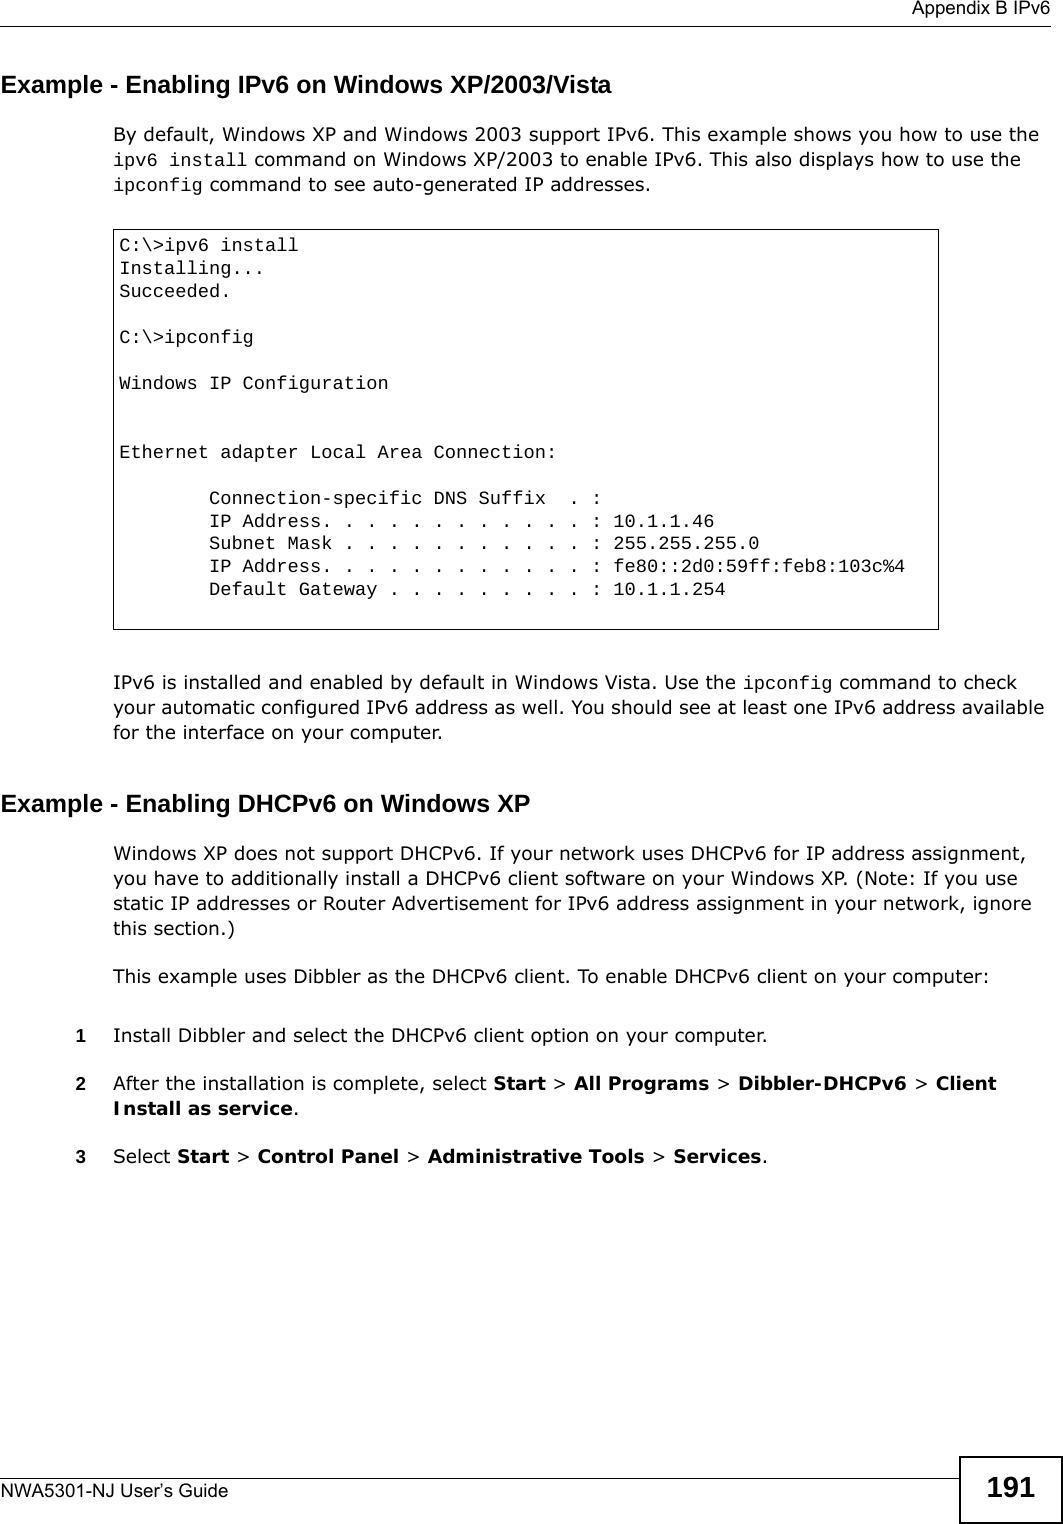  Appendix B IPv6NWA5301-NJ User’s Guide 191Example - Enabling IPv6 on Windows XP/2003/VistaBy default, Windows XP and Windows 2003 support IPv6. This example shows you how to use the ipv6 install command on Windows XP/2003 to enable IPv6. This also displays how to use the ipconfig command to see auto-generated IP addresses.IPv6 is installed and enabled by default in Windows Vista. Use the ipconfig command to check your automatic configured IPv6 address as well. You should see at least one IPv6 address available for the interface on your computer.Example - Enabling DHCPv6 on Windows XPWindows XP does not support DHCPv6. If your network uses DHCPv6 for IP address assignment, you have to additionally install a DHCPv6 client software on your Windows XP. (Note: If you use static IP addresses or Router Advertisement for IPv6 address assignment in your network, ignore this section.)This example uses Dibbler as the DHCPv6 client. To enable DHCPv6 client on your computer:1Install Dibbler and select the DHCPv6 client option on your computer.2After the installation is complete, select Start &gt; All Programs &gt; Dibbler-DHCPv6 &gt; Client Install as service.3Select Start &gt; Control Panel &gt; Administrative Tools &gt; Services.C:\&gt;ipv6 installInstalling...Succeeded.C:\&gt;ipconfigWindows IP ConfigurationEthernet adapter Local Area Connection:        Connection-specific DNS Suffix  . :         IP Address. . . . . . . . . . . . : 10.1.1.46        Subnet Mask . . . . . . . . . . . : 255.255.255.0        IP Address. . . . . . . . . . . . : fe80::2d0:59ff:feb8:103c%4        Default Gateway . . . . . . . . . : 10.1.1.254